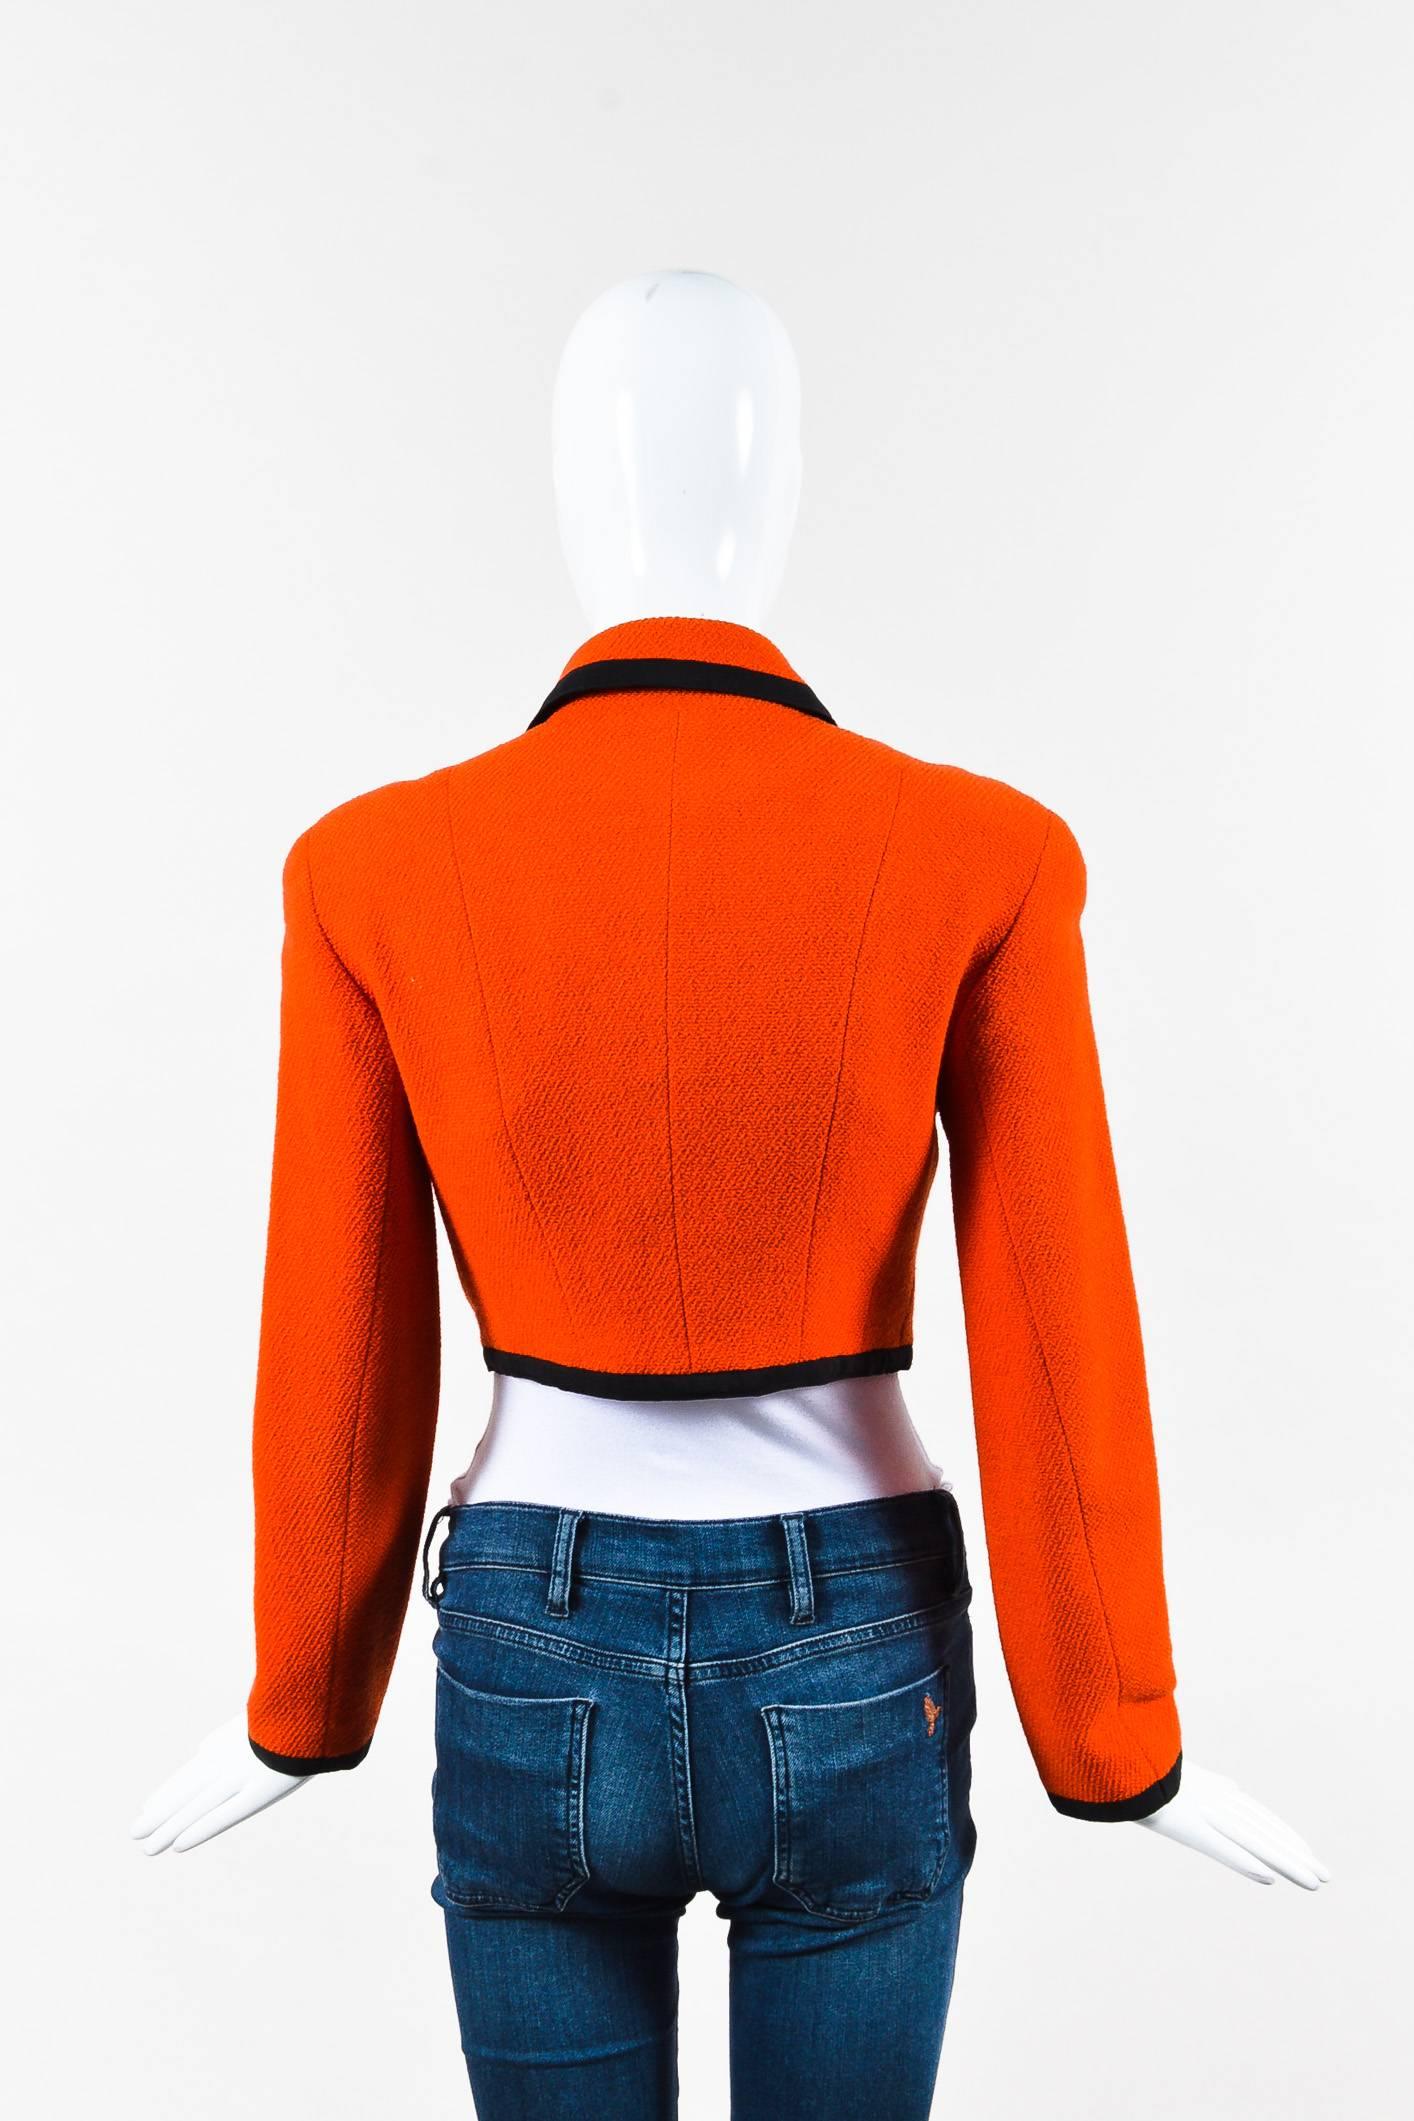 Orange wool, cropped long-sleeve jacket by Chanel Boutique. Features chest pockets, gold-tone 'CC' button-up closure, and black grosgrain ribbon trim. Non-removable shoulder pads. Orange silk lining.

Additional measurements: Sleeve Length 23